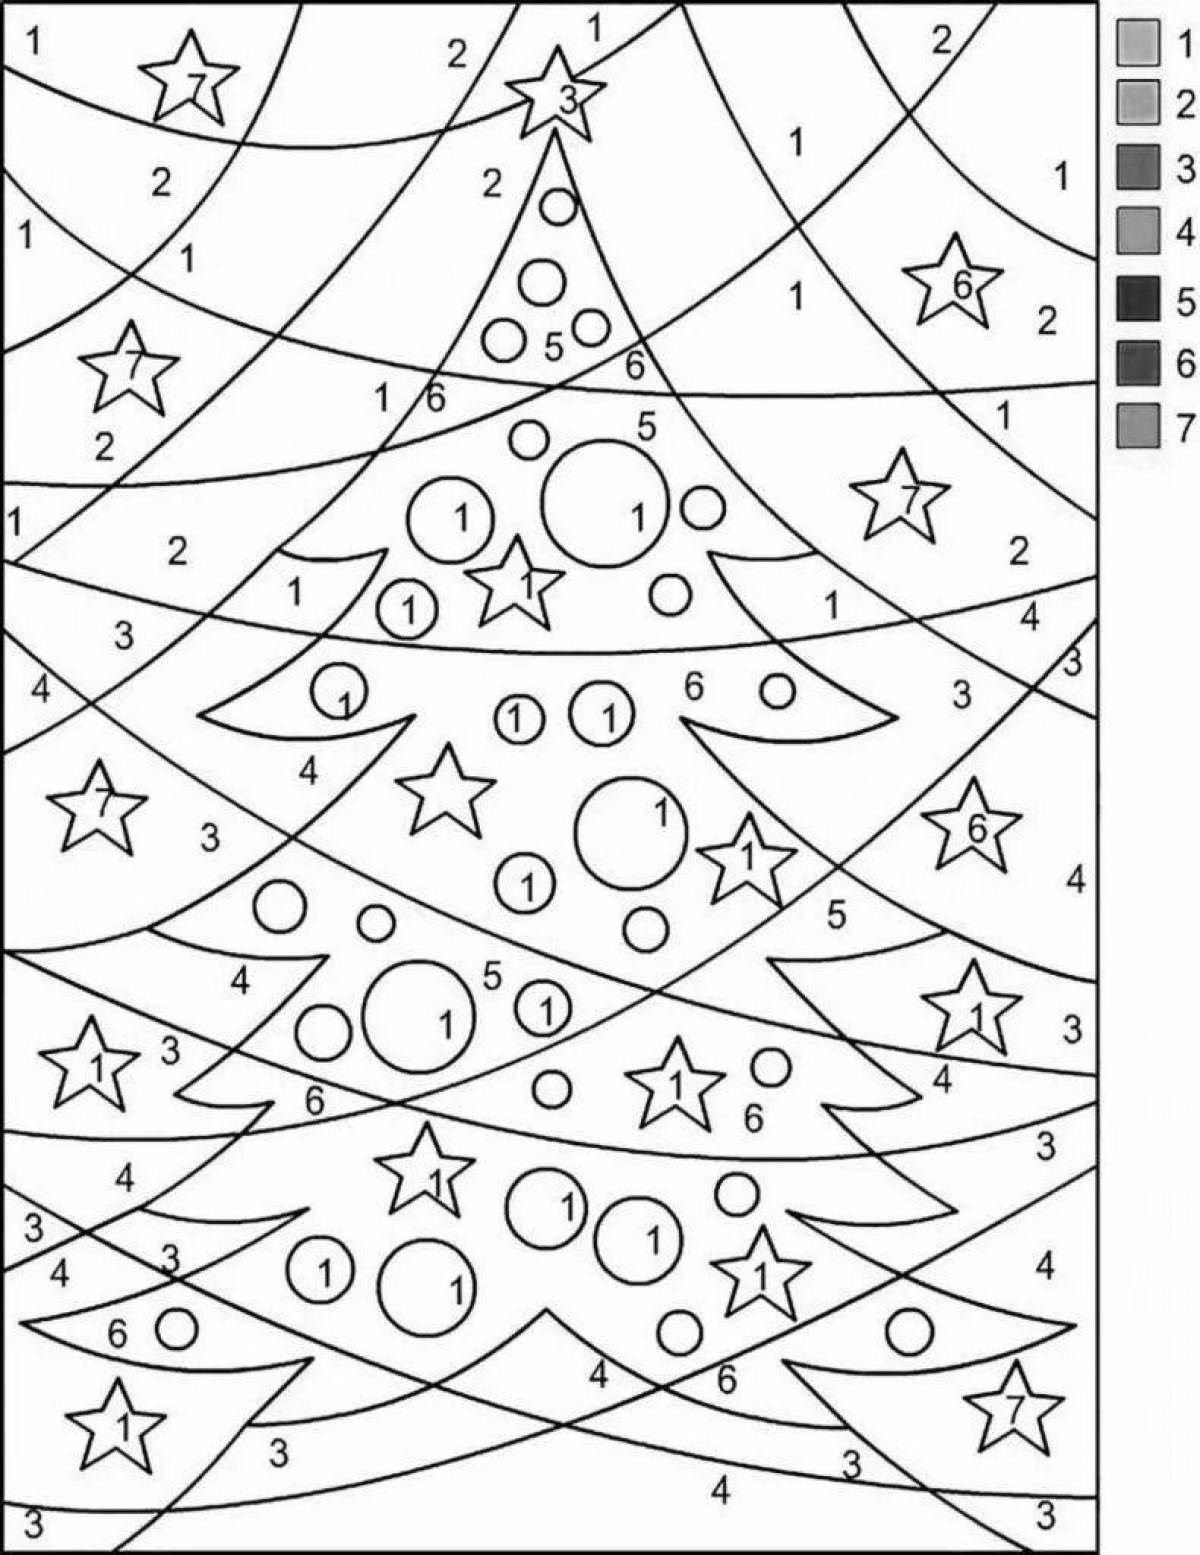 Incredible Christmas tree coloring book for kids 6-7 years old